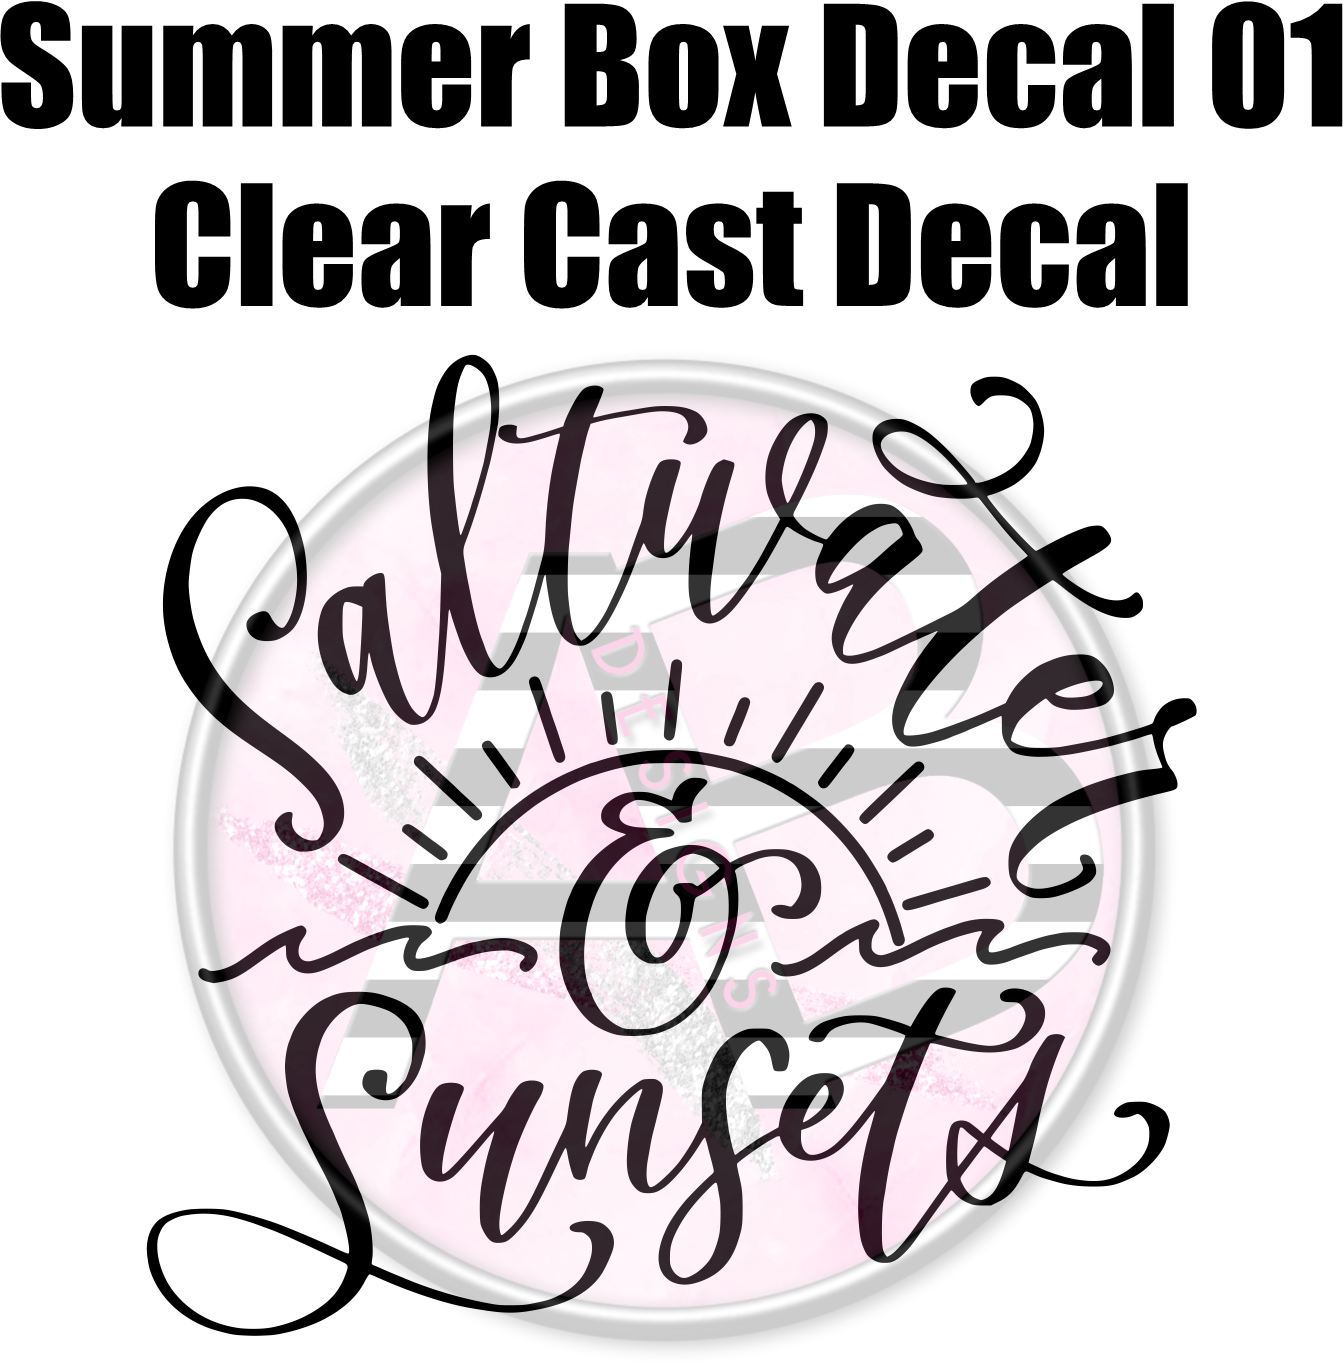 Summer Box Decal 01 - Clear Cast Decal